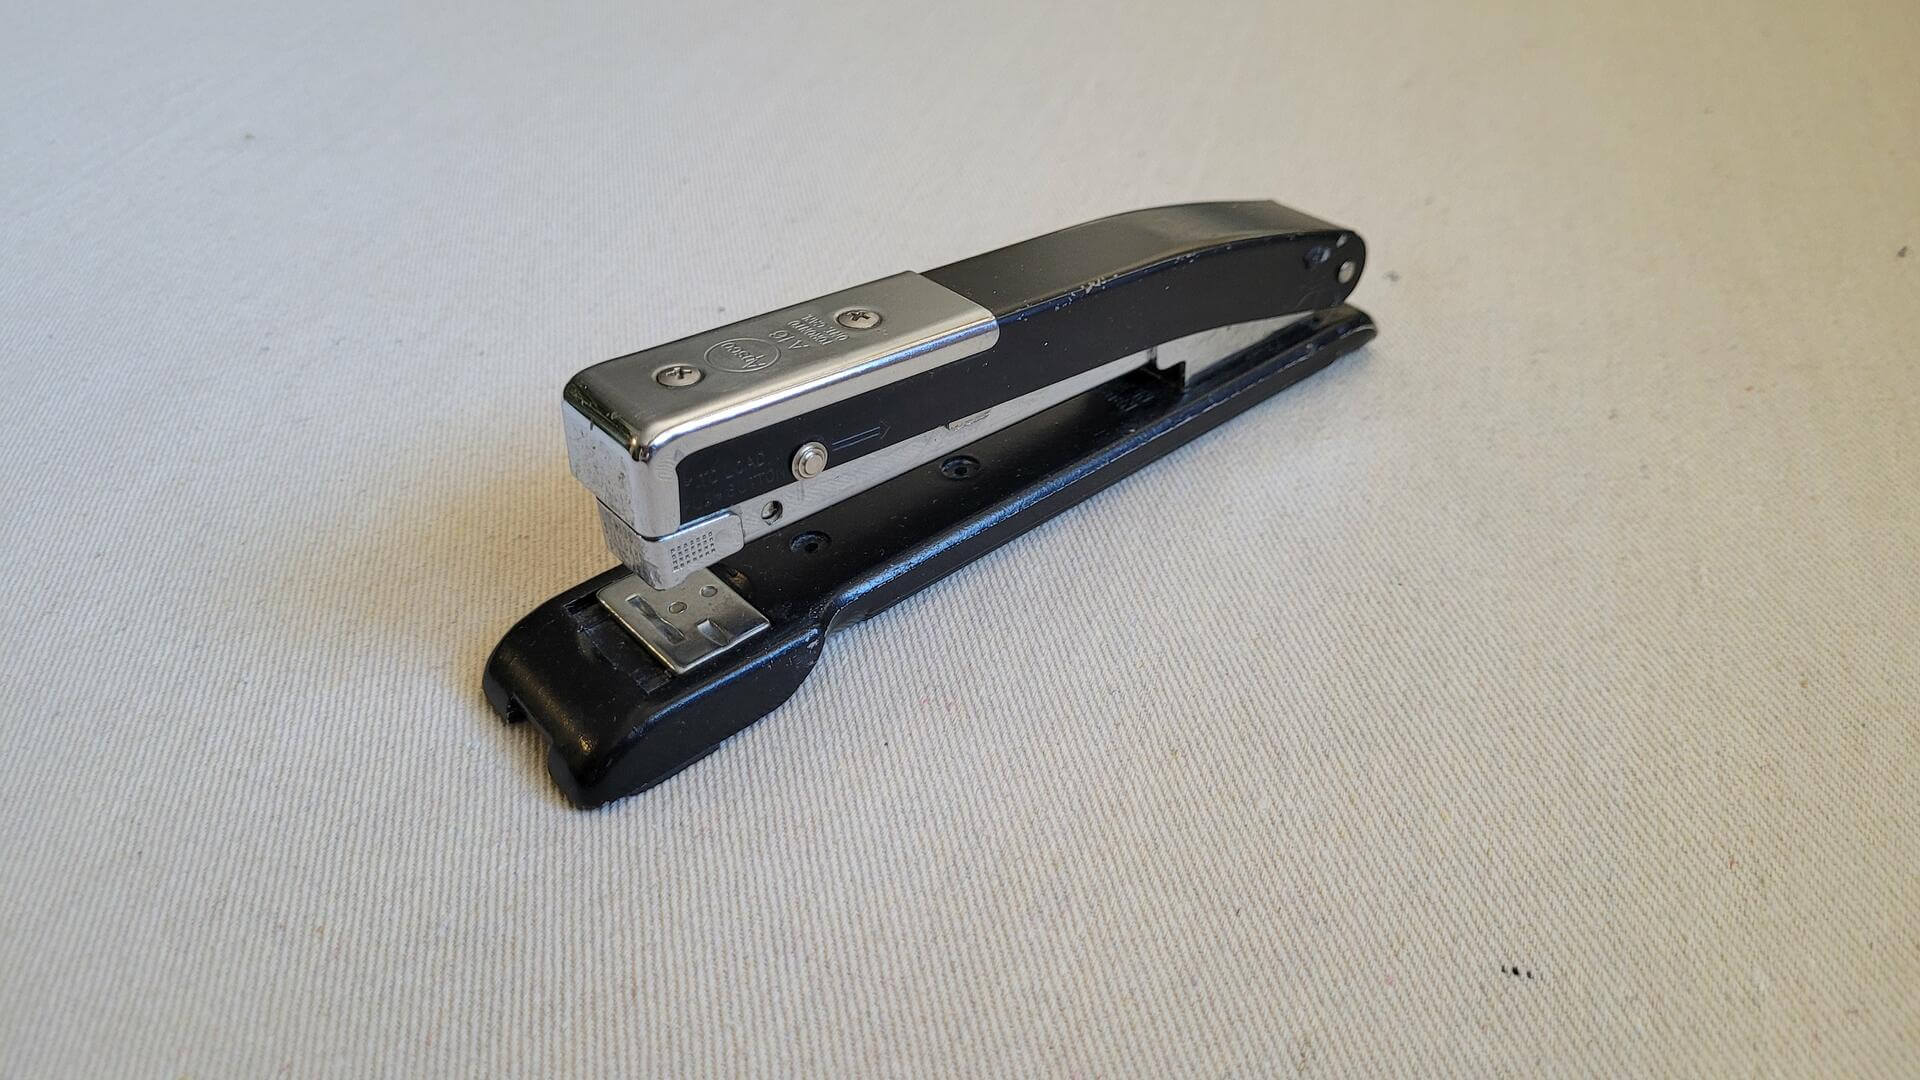 MCM Apsco A16 black and chrome steel paper stapler Isaberg Verkstadts AB design. Vintage made in Sweden collectible mid century office tools and equipment